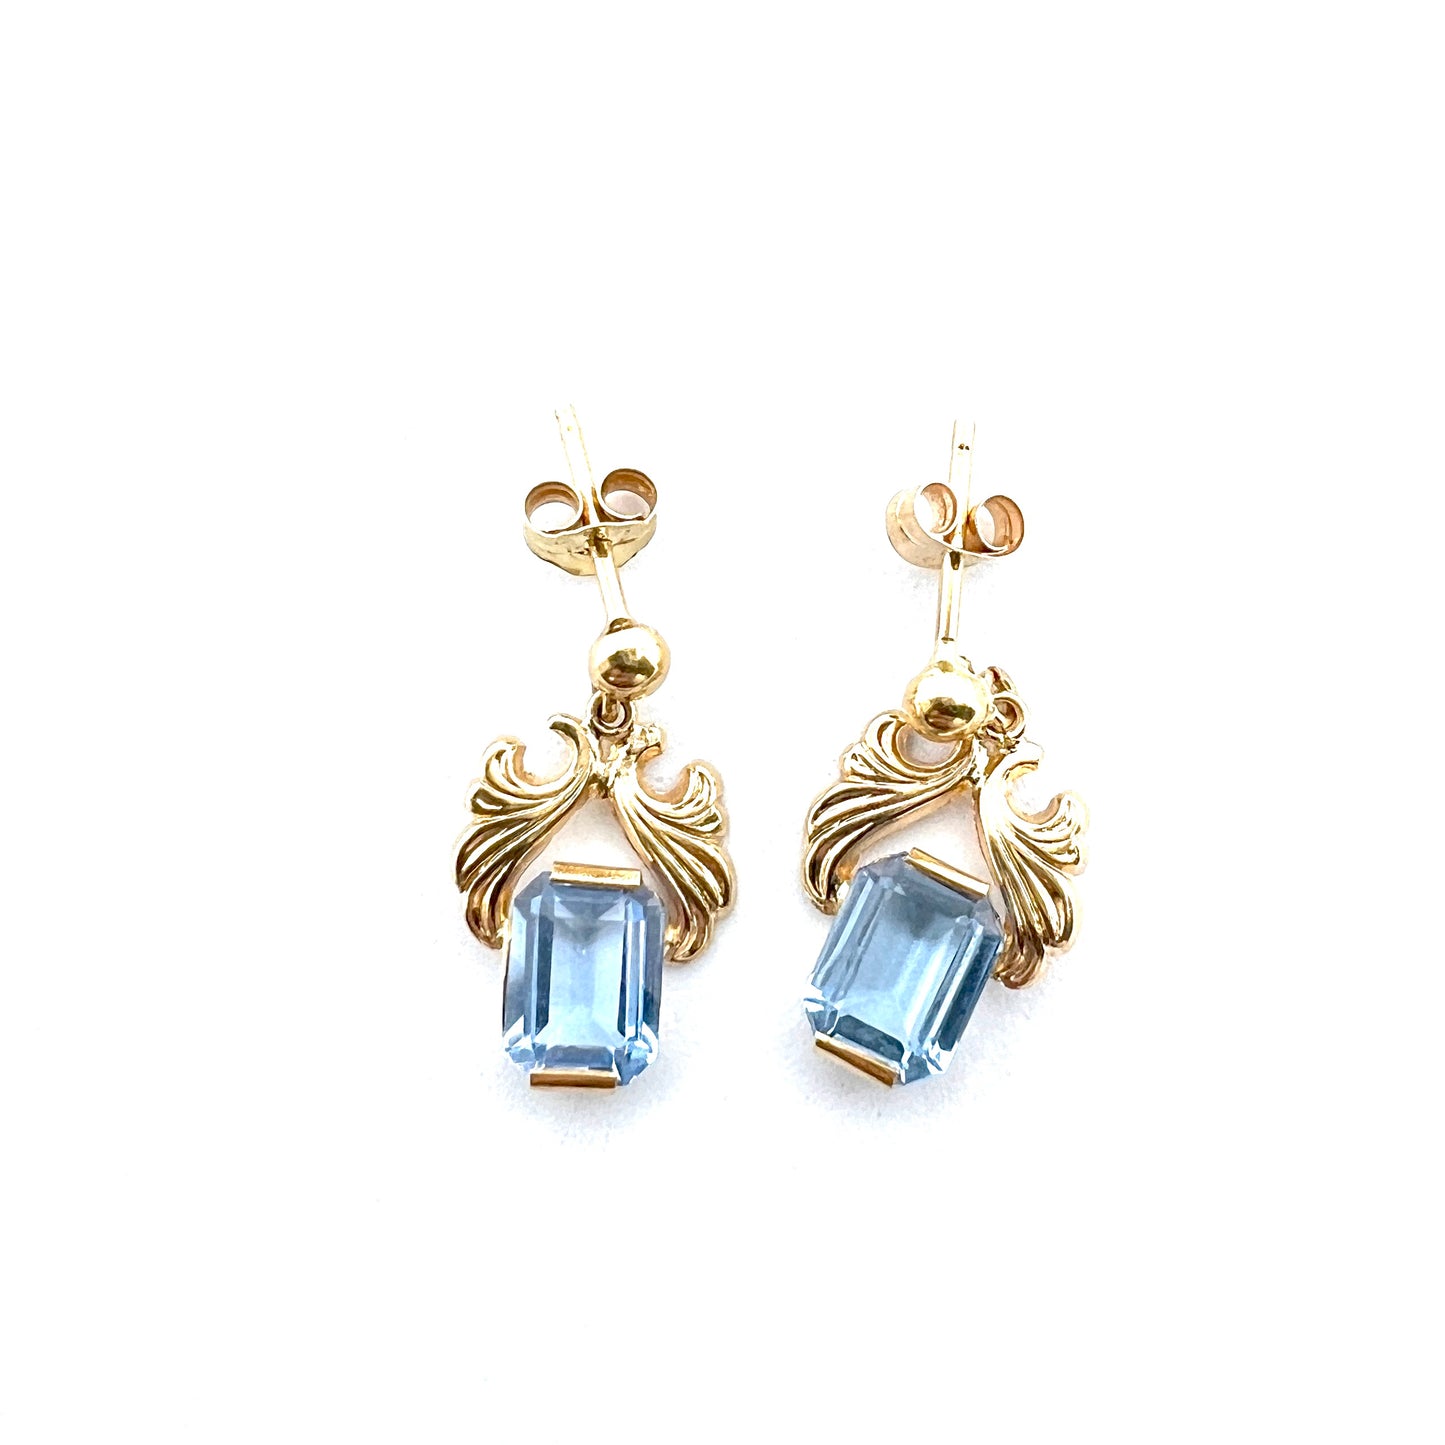 Sweden c 1950s. Vintage 18k Gold Ice Blue Synthetic Spinel Earrings.